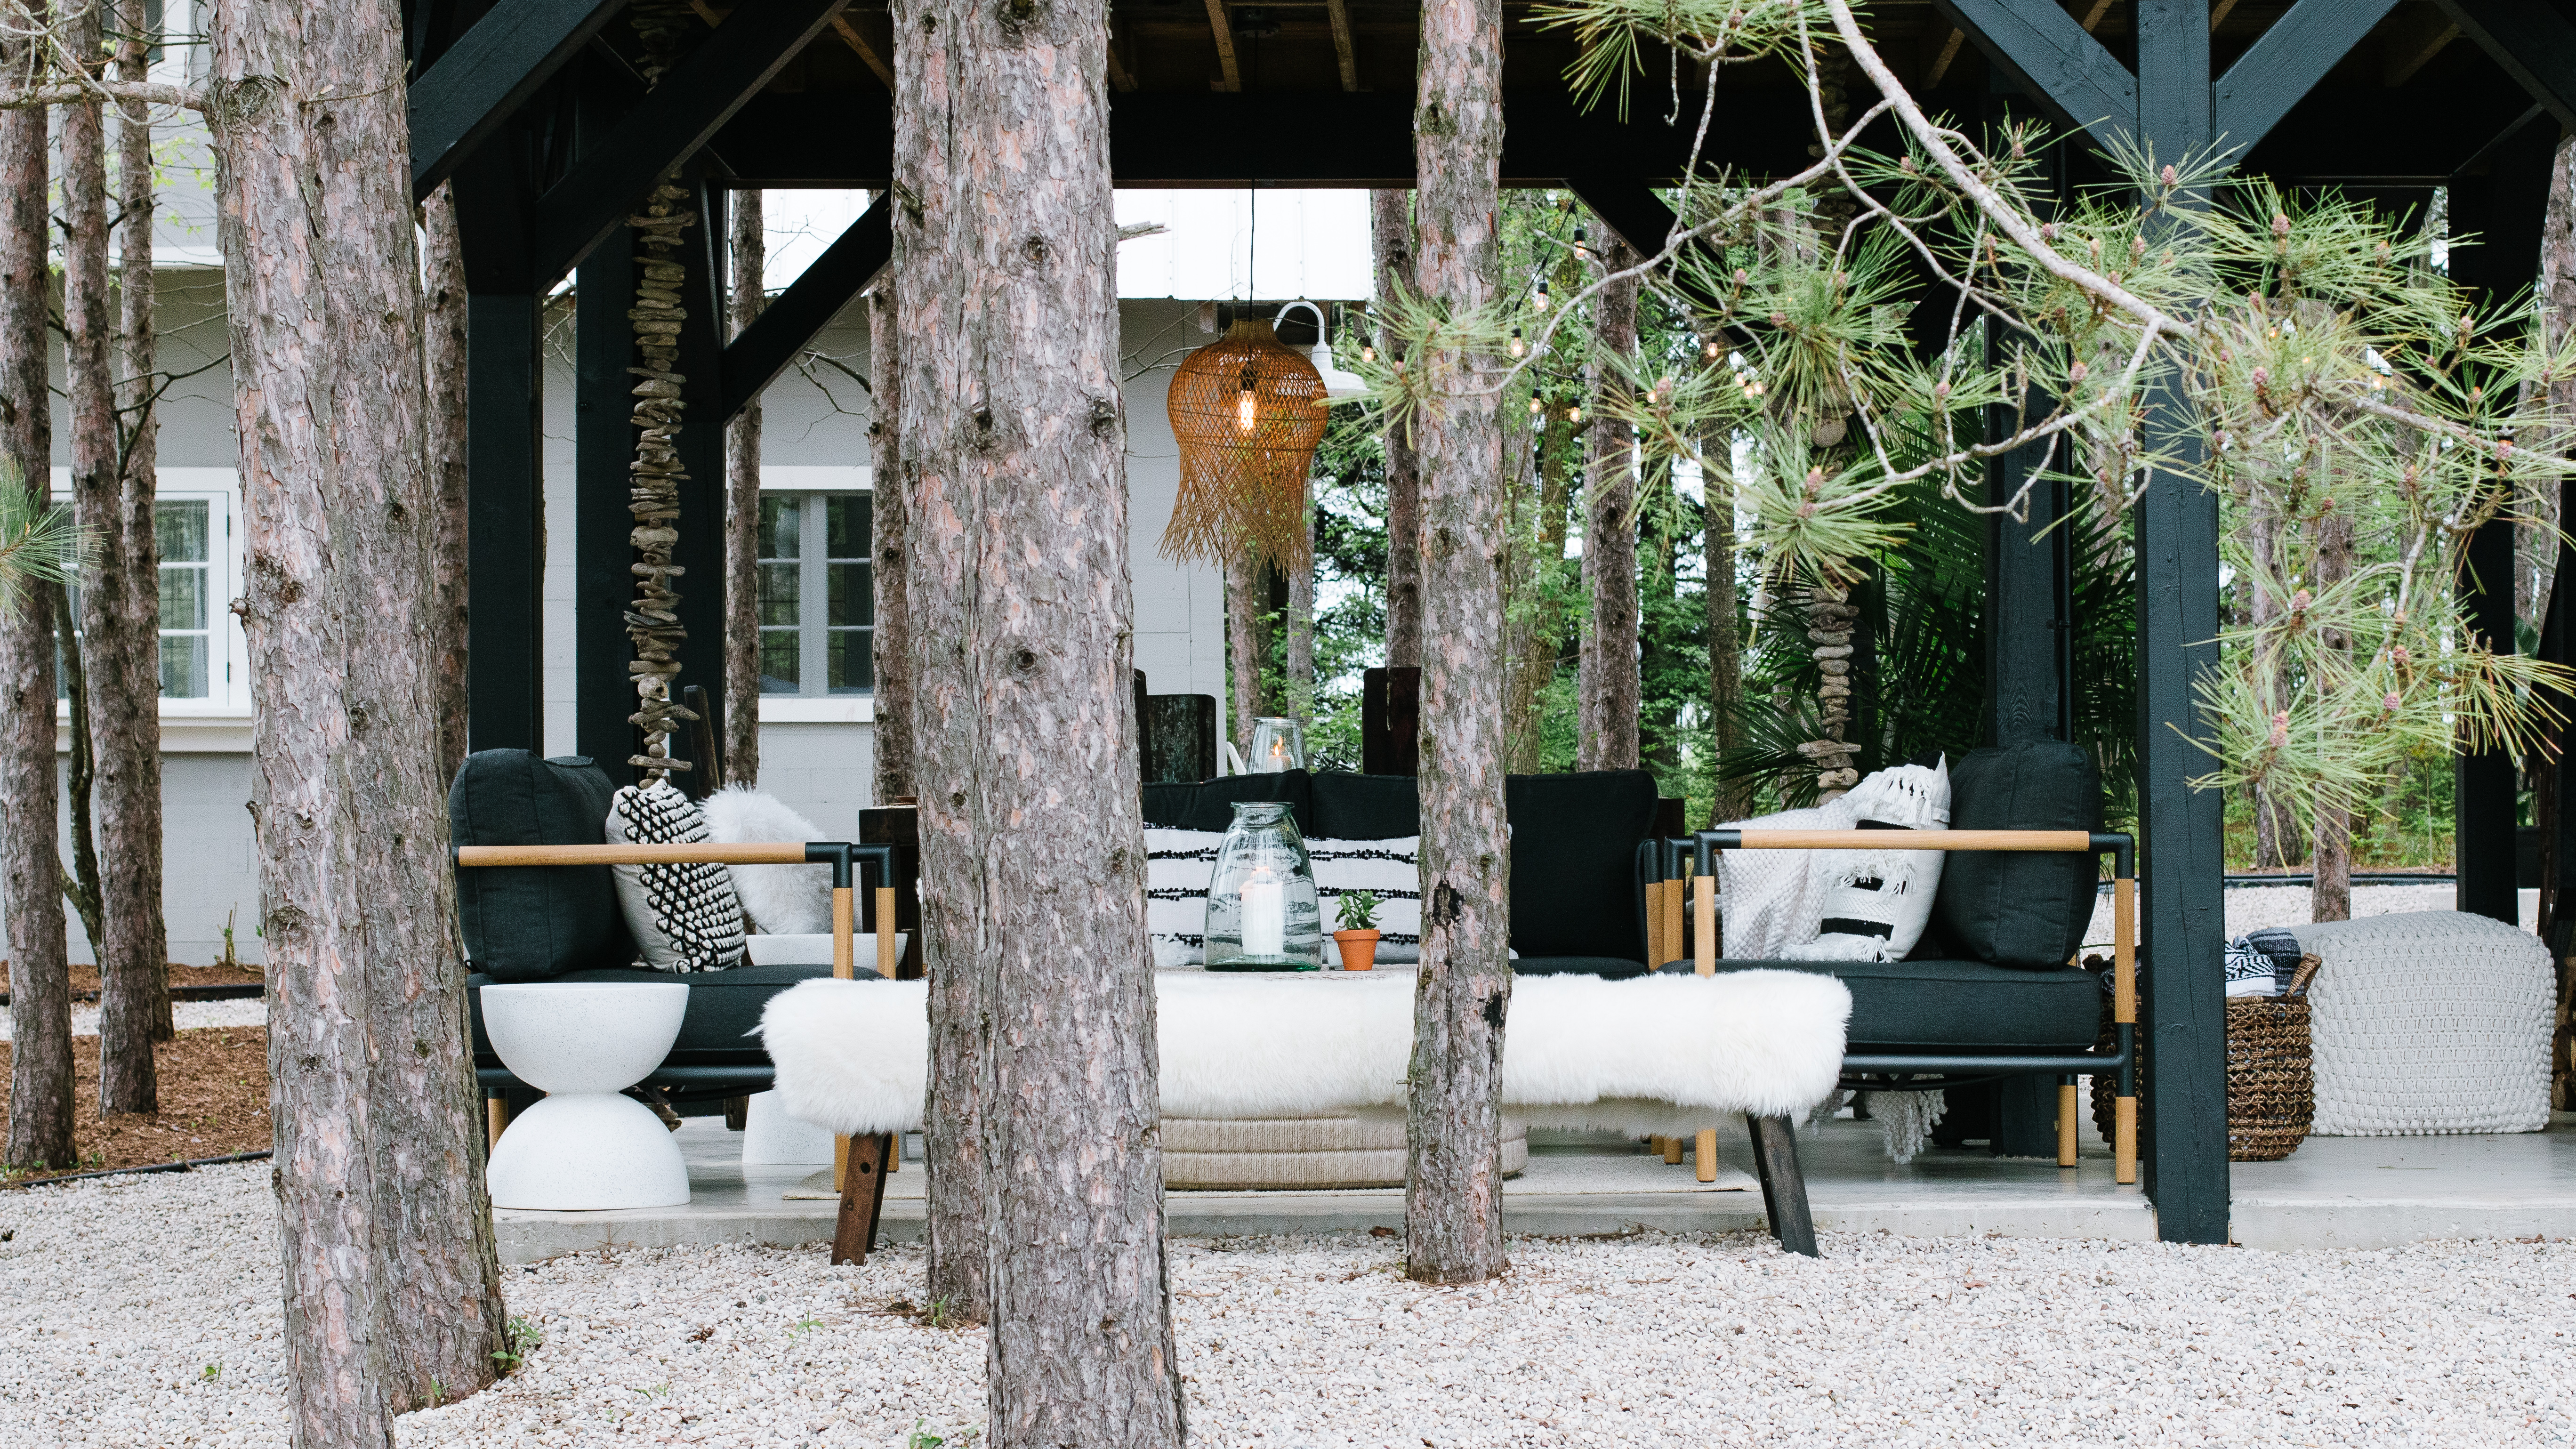 Treehouse + Cabin Home Tour | Need some styling and cozying up interior ideas? We gotcha covered | www.lynneknowlton.com 